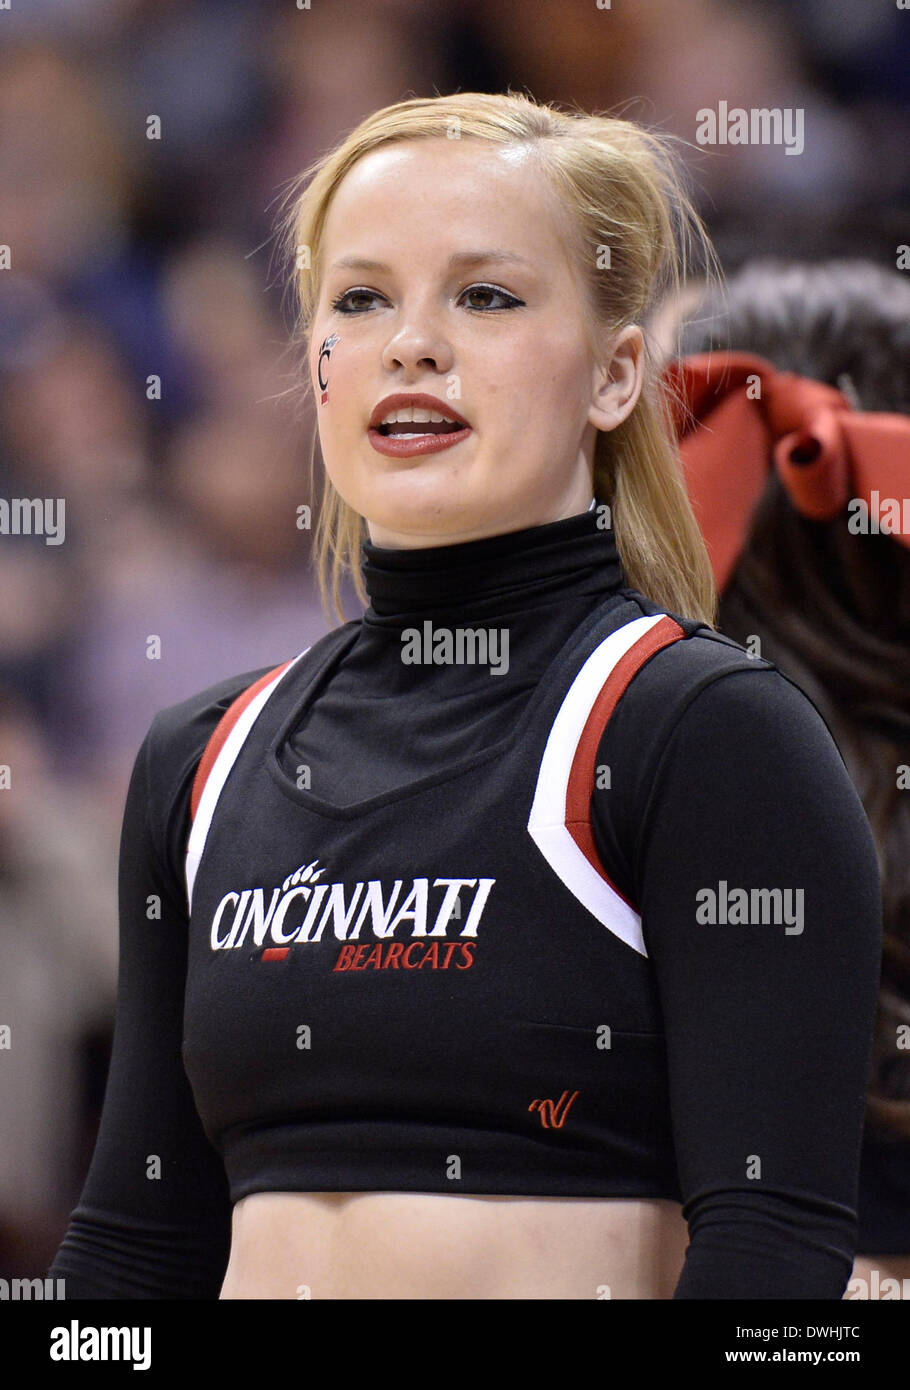 Uncasville, CT, USA. 8th Mar, 2014. Saturday March 8, 2014: A Cincinnati Bearcat cheerleader looks on during the 2nd half of the American Athletic Conference womens basketball tournament game between Cincinnati and UConn at Mohegan Sun Arena in Uncasville, CT. UConn beat Cincinnati easily 72-42. Bill Shettle / Cal Sport Media. © csm/Alamy Live News Stock Photo